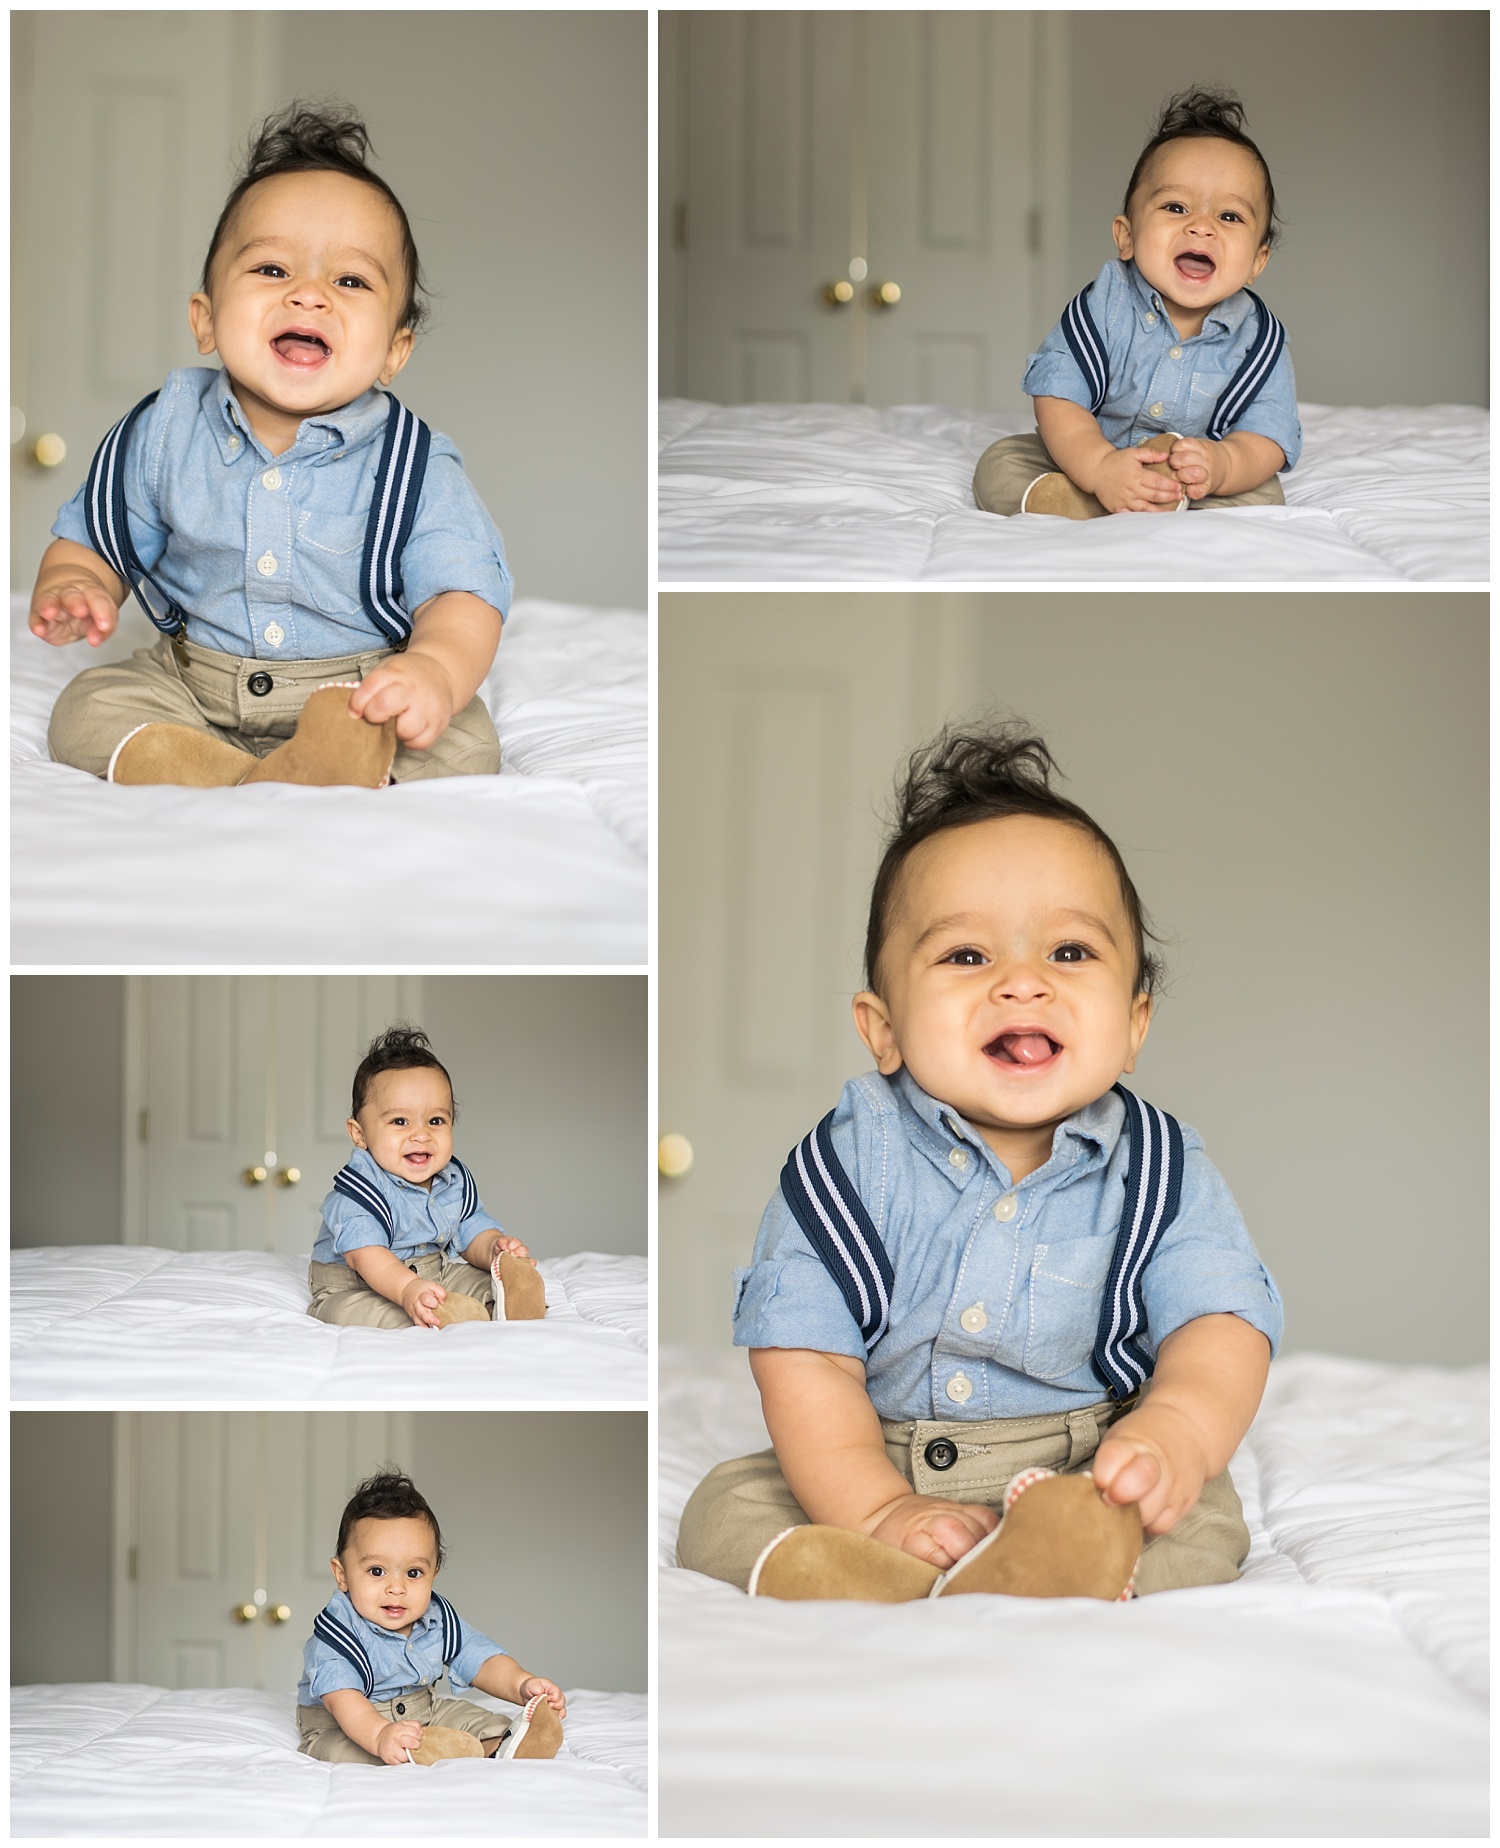 these are a collage of images of a six month old baby boy sitting up on the bed in a suspenders outfit.